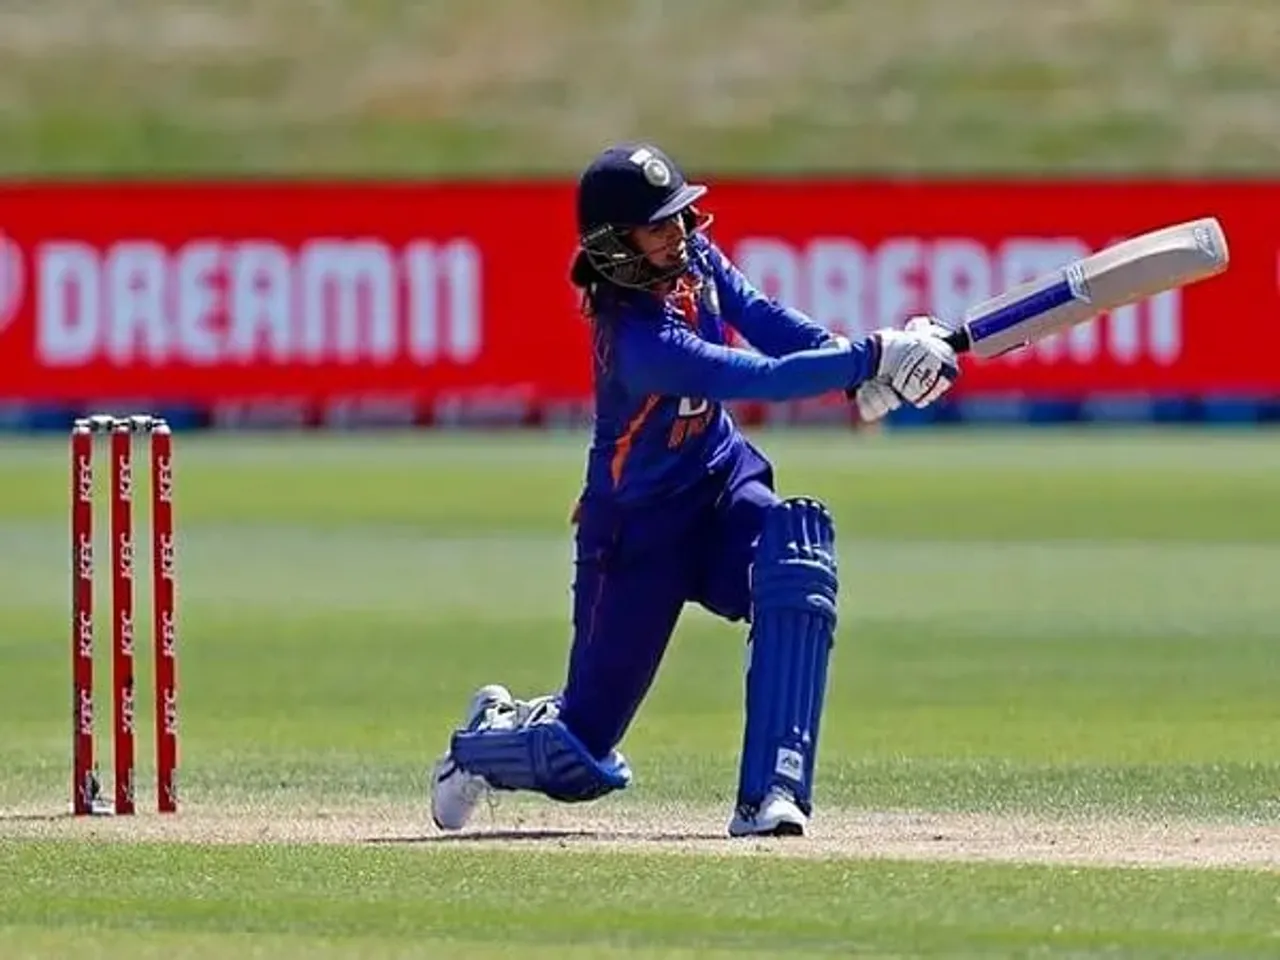 "When I retire after this tournament, I will see that the squad is far more stronger with the upcoming new talent:" Mithali Raj | SportzPoint.com